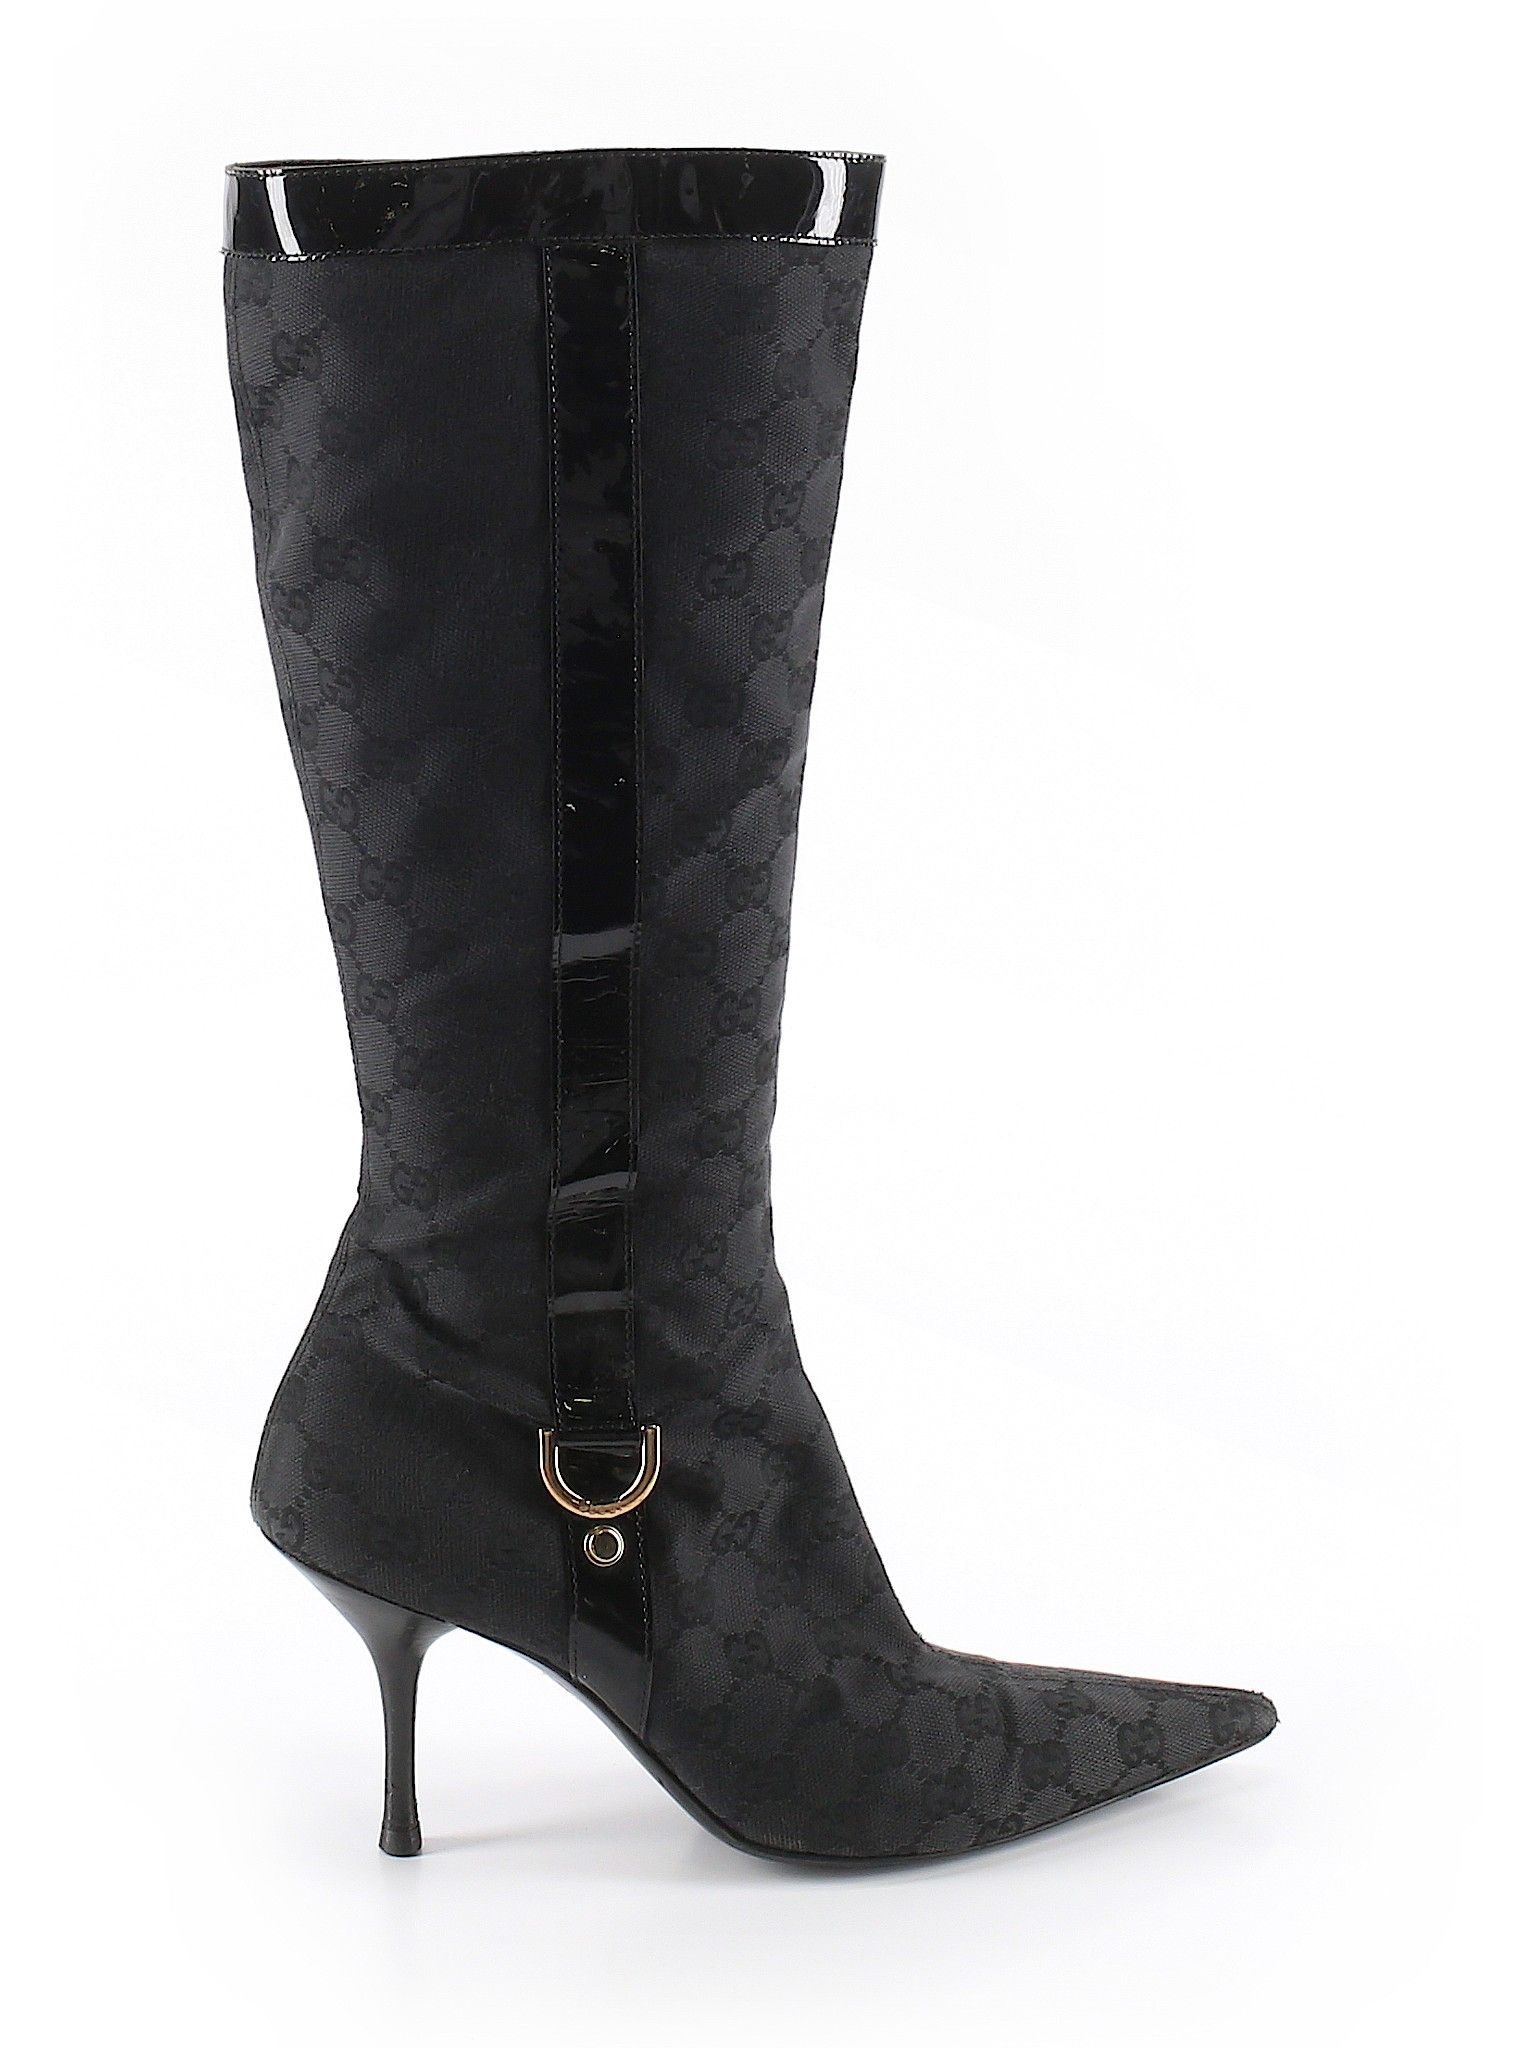 Gucci Boots Size 8 1/2: Black Women's Clothing - 50091822 | thredUP